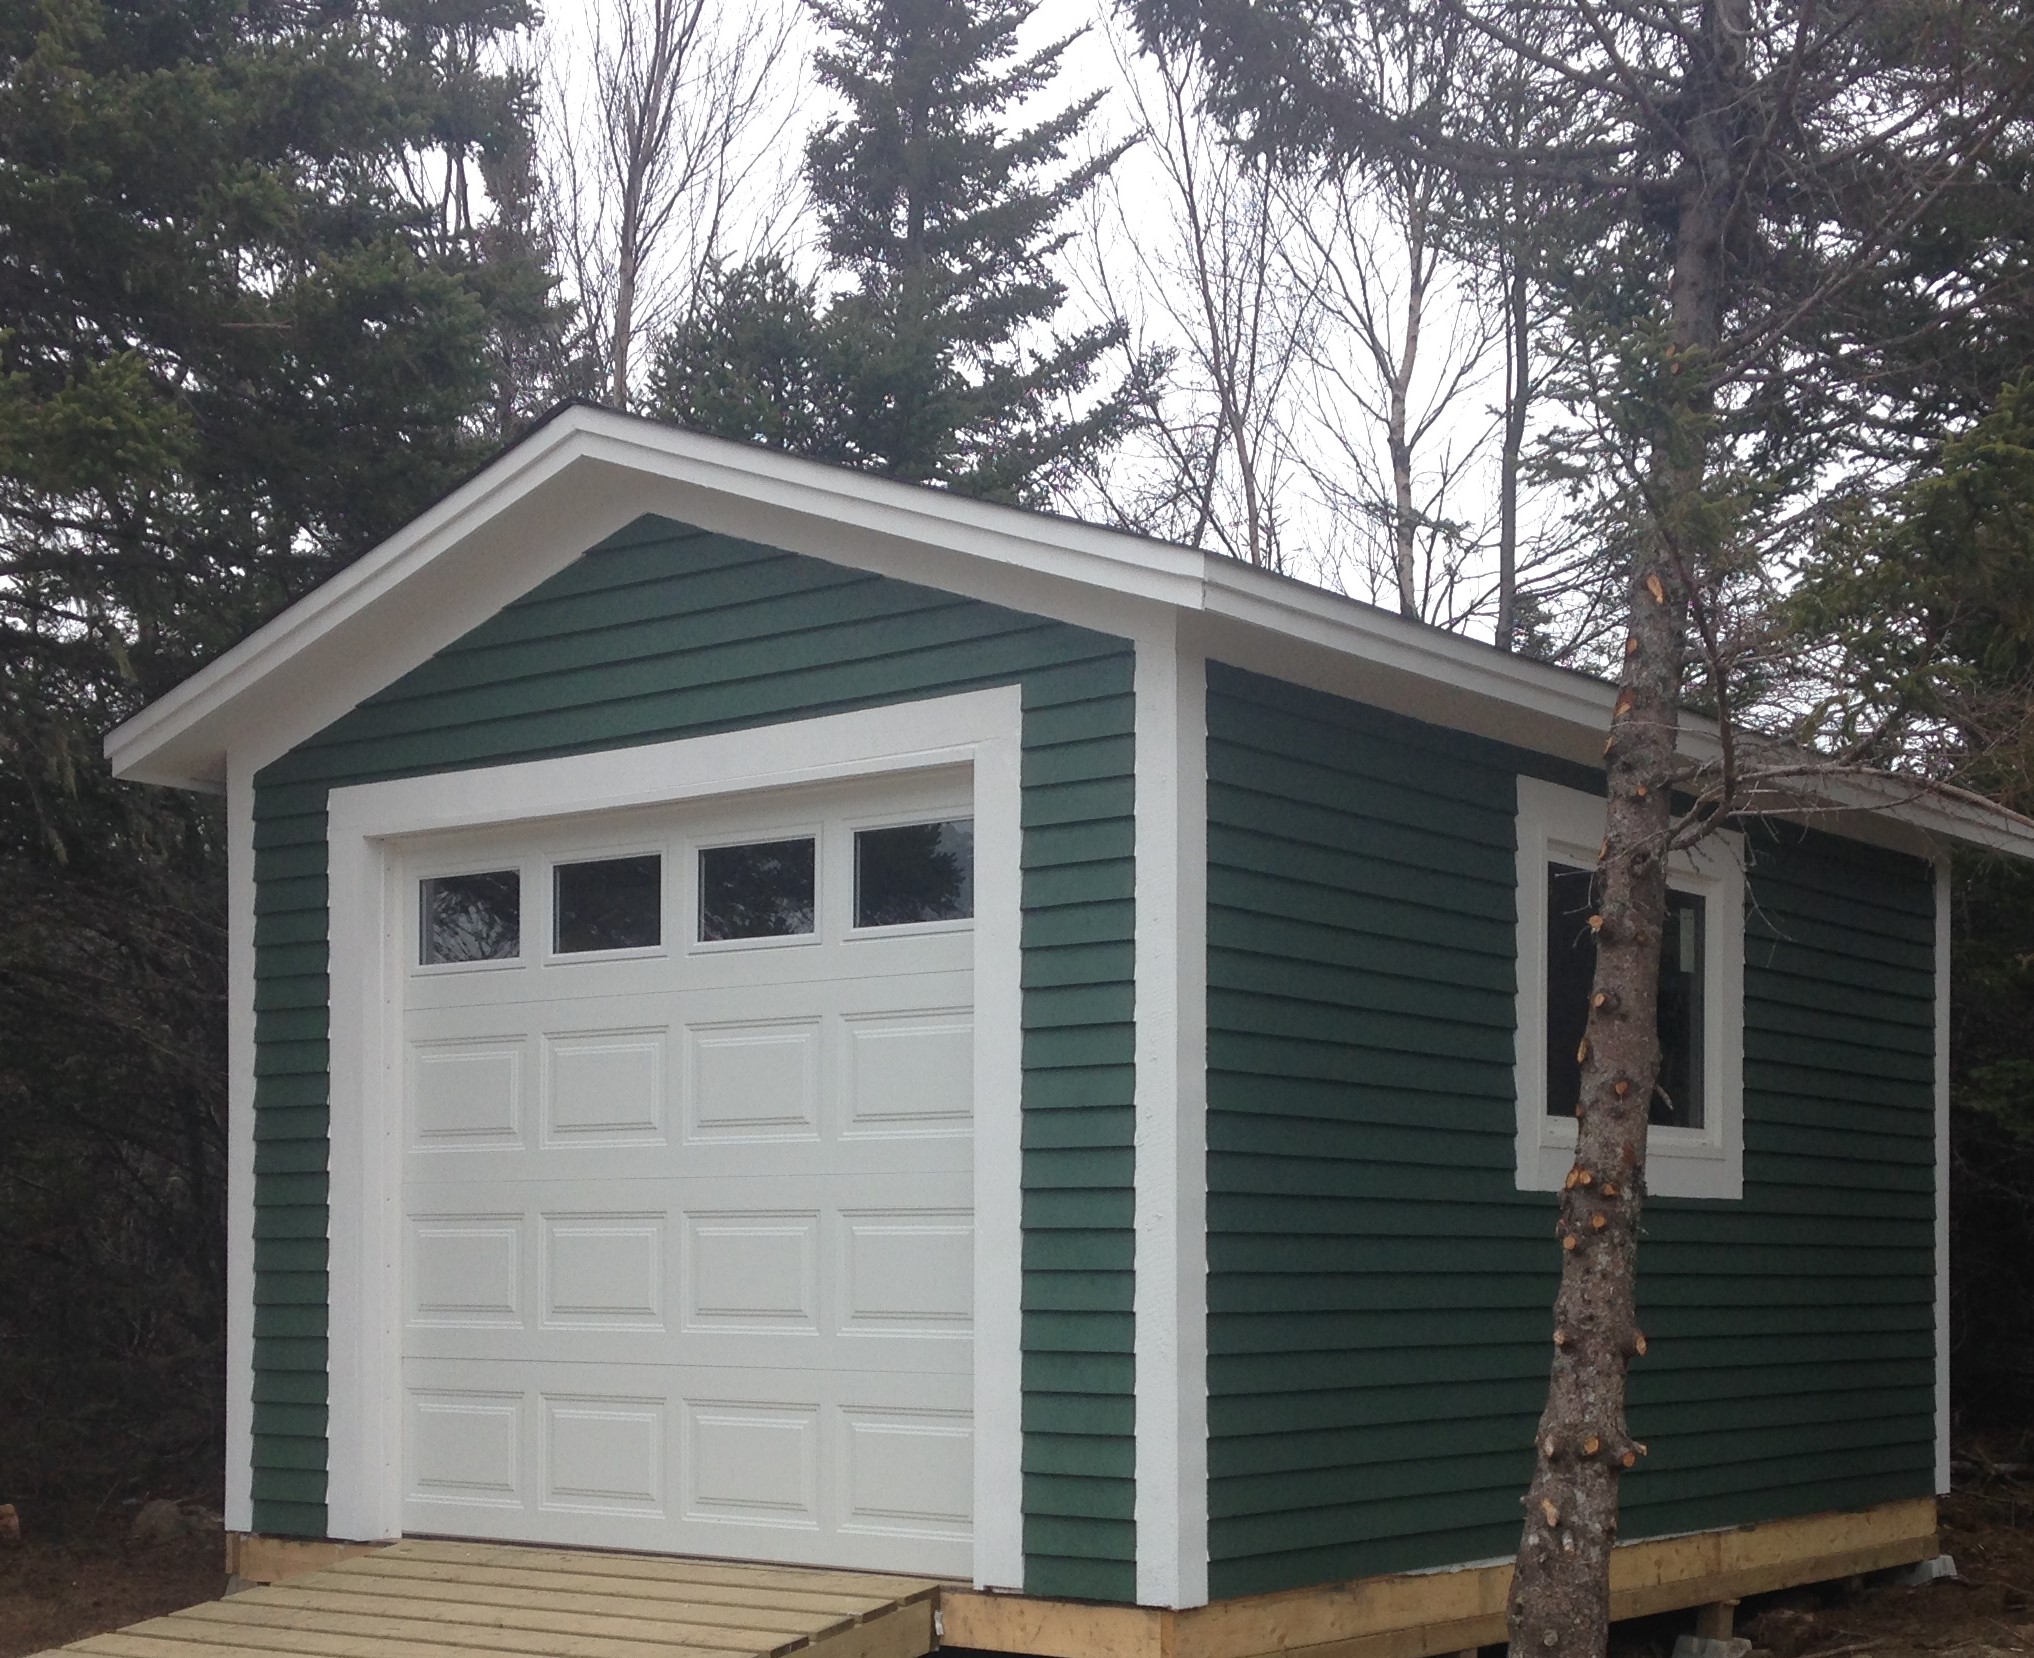 New shed with overhead door and ramp for toys and tools